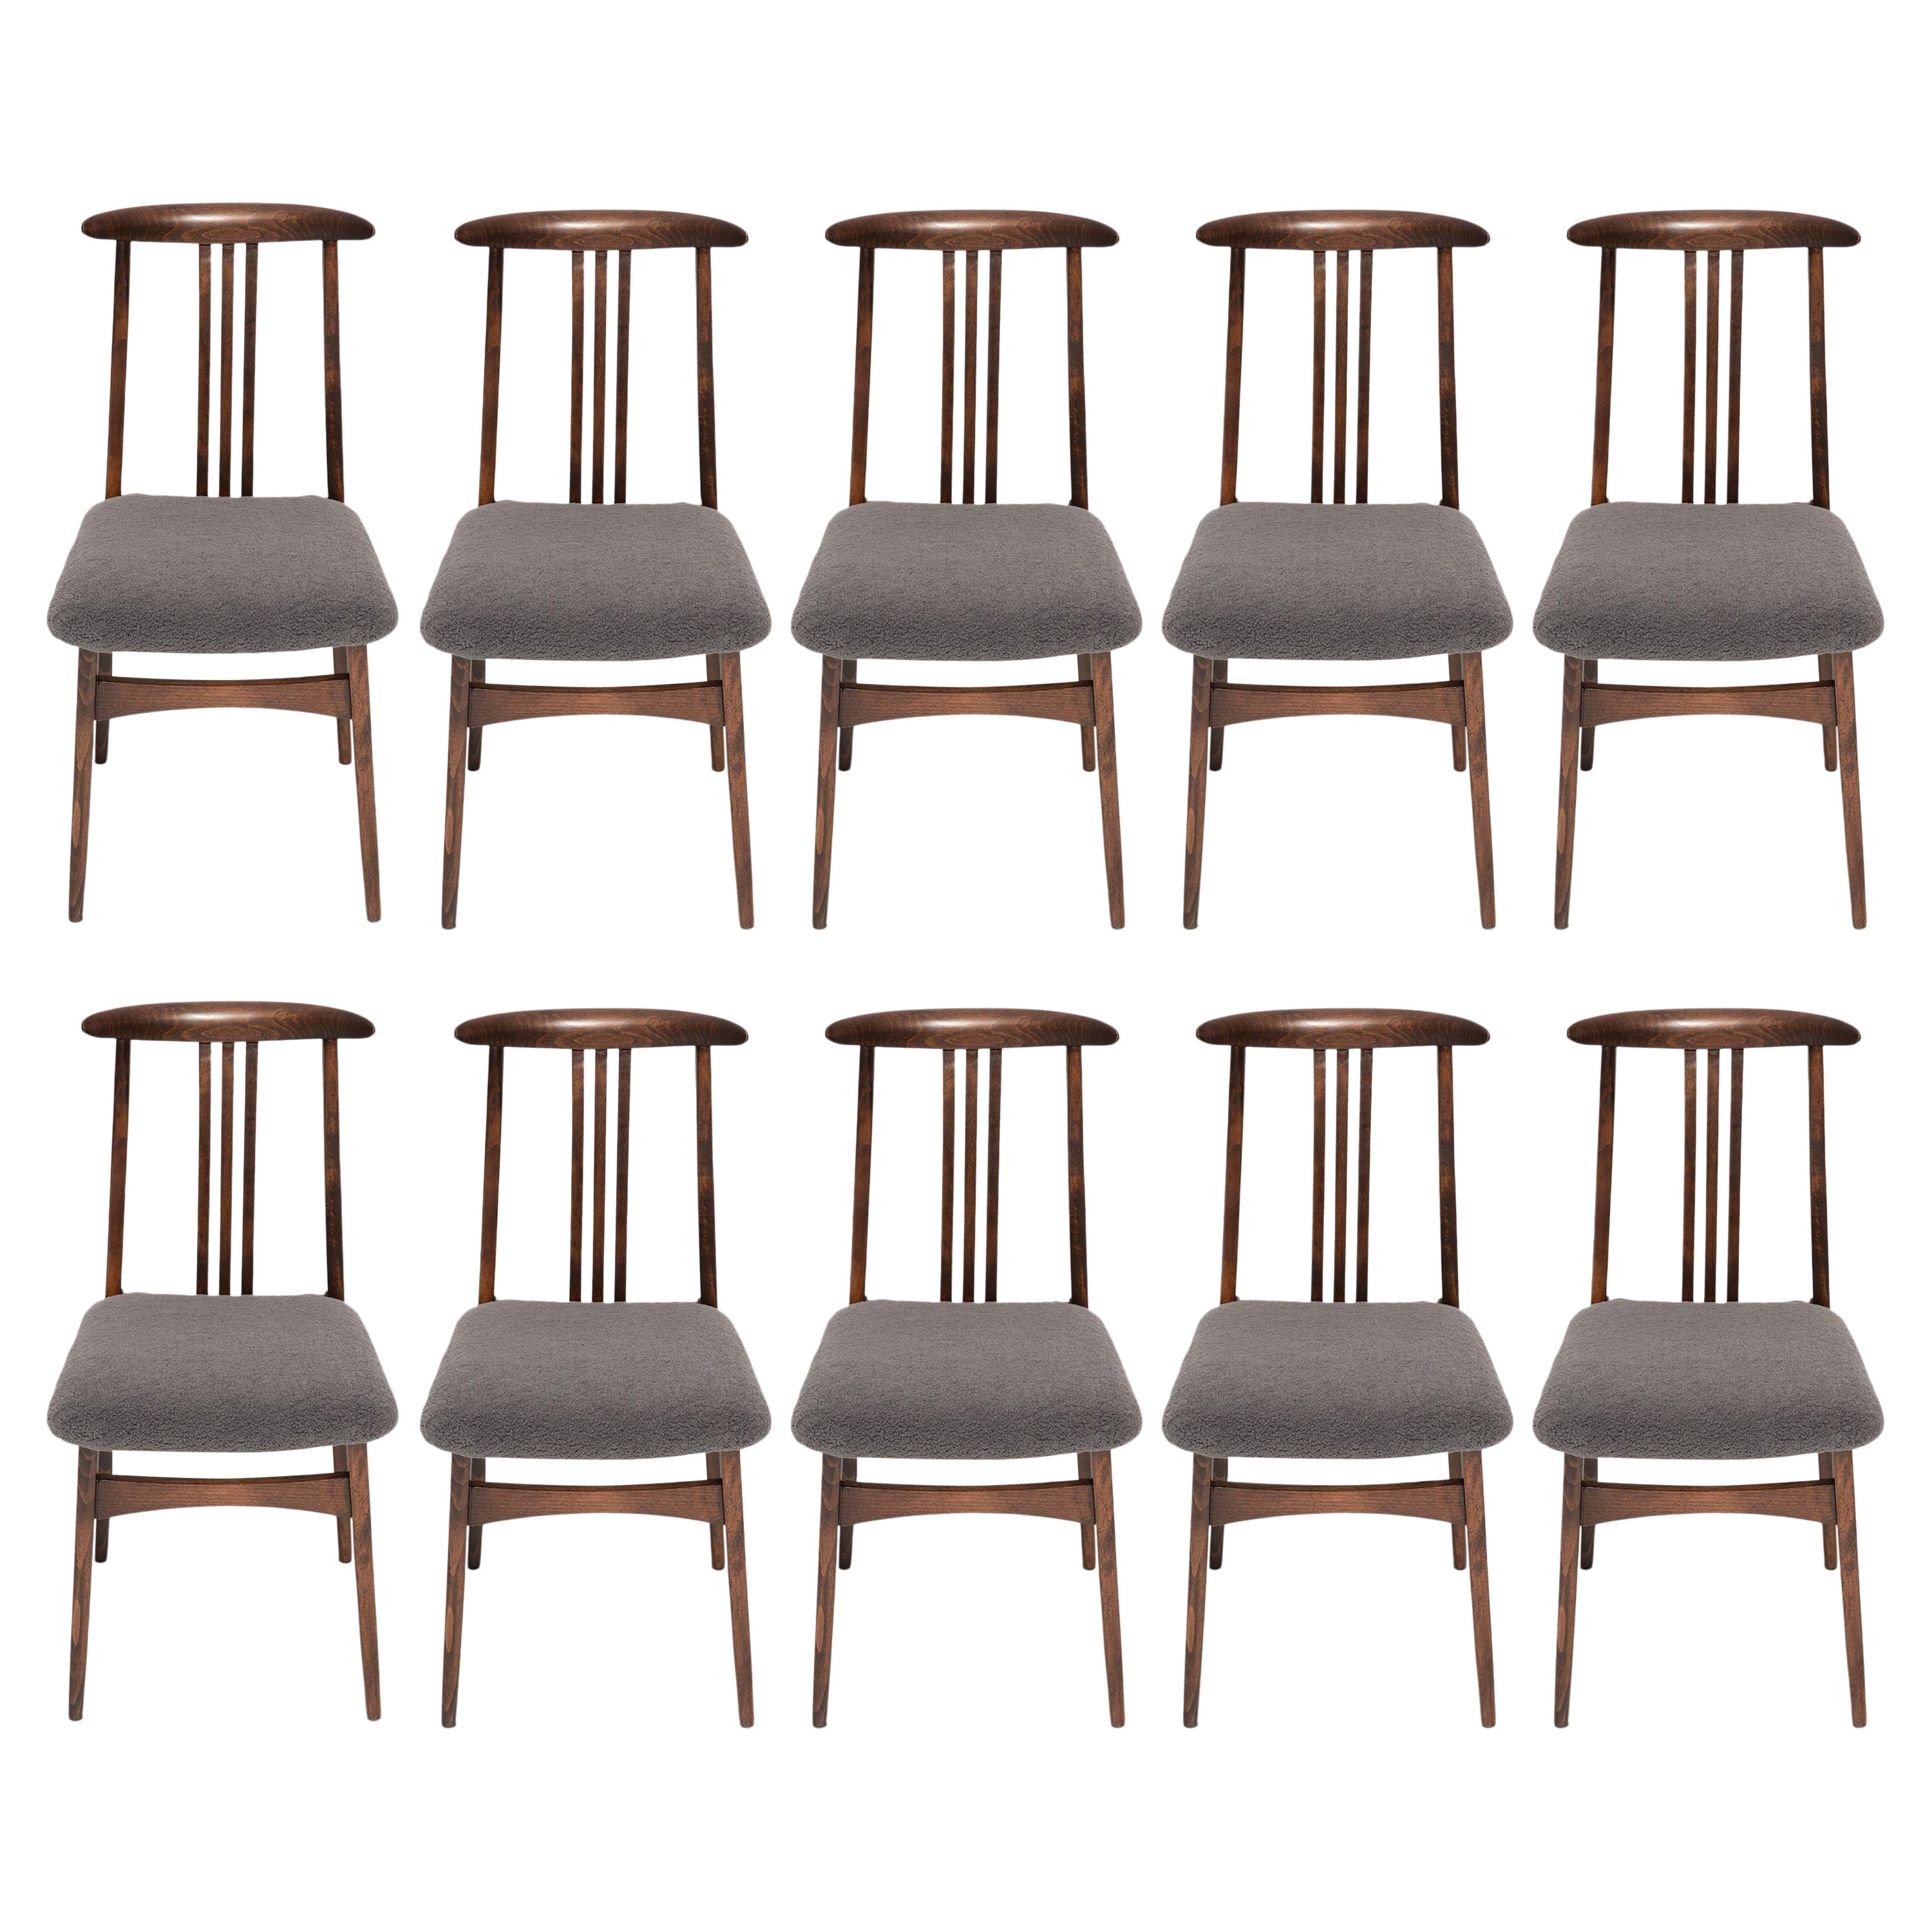 Set of Ten Grey Boucle Chairs, Designed by Zielinski, Europe, 1960s